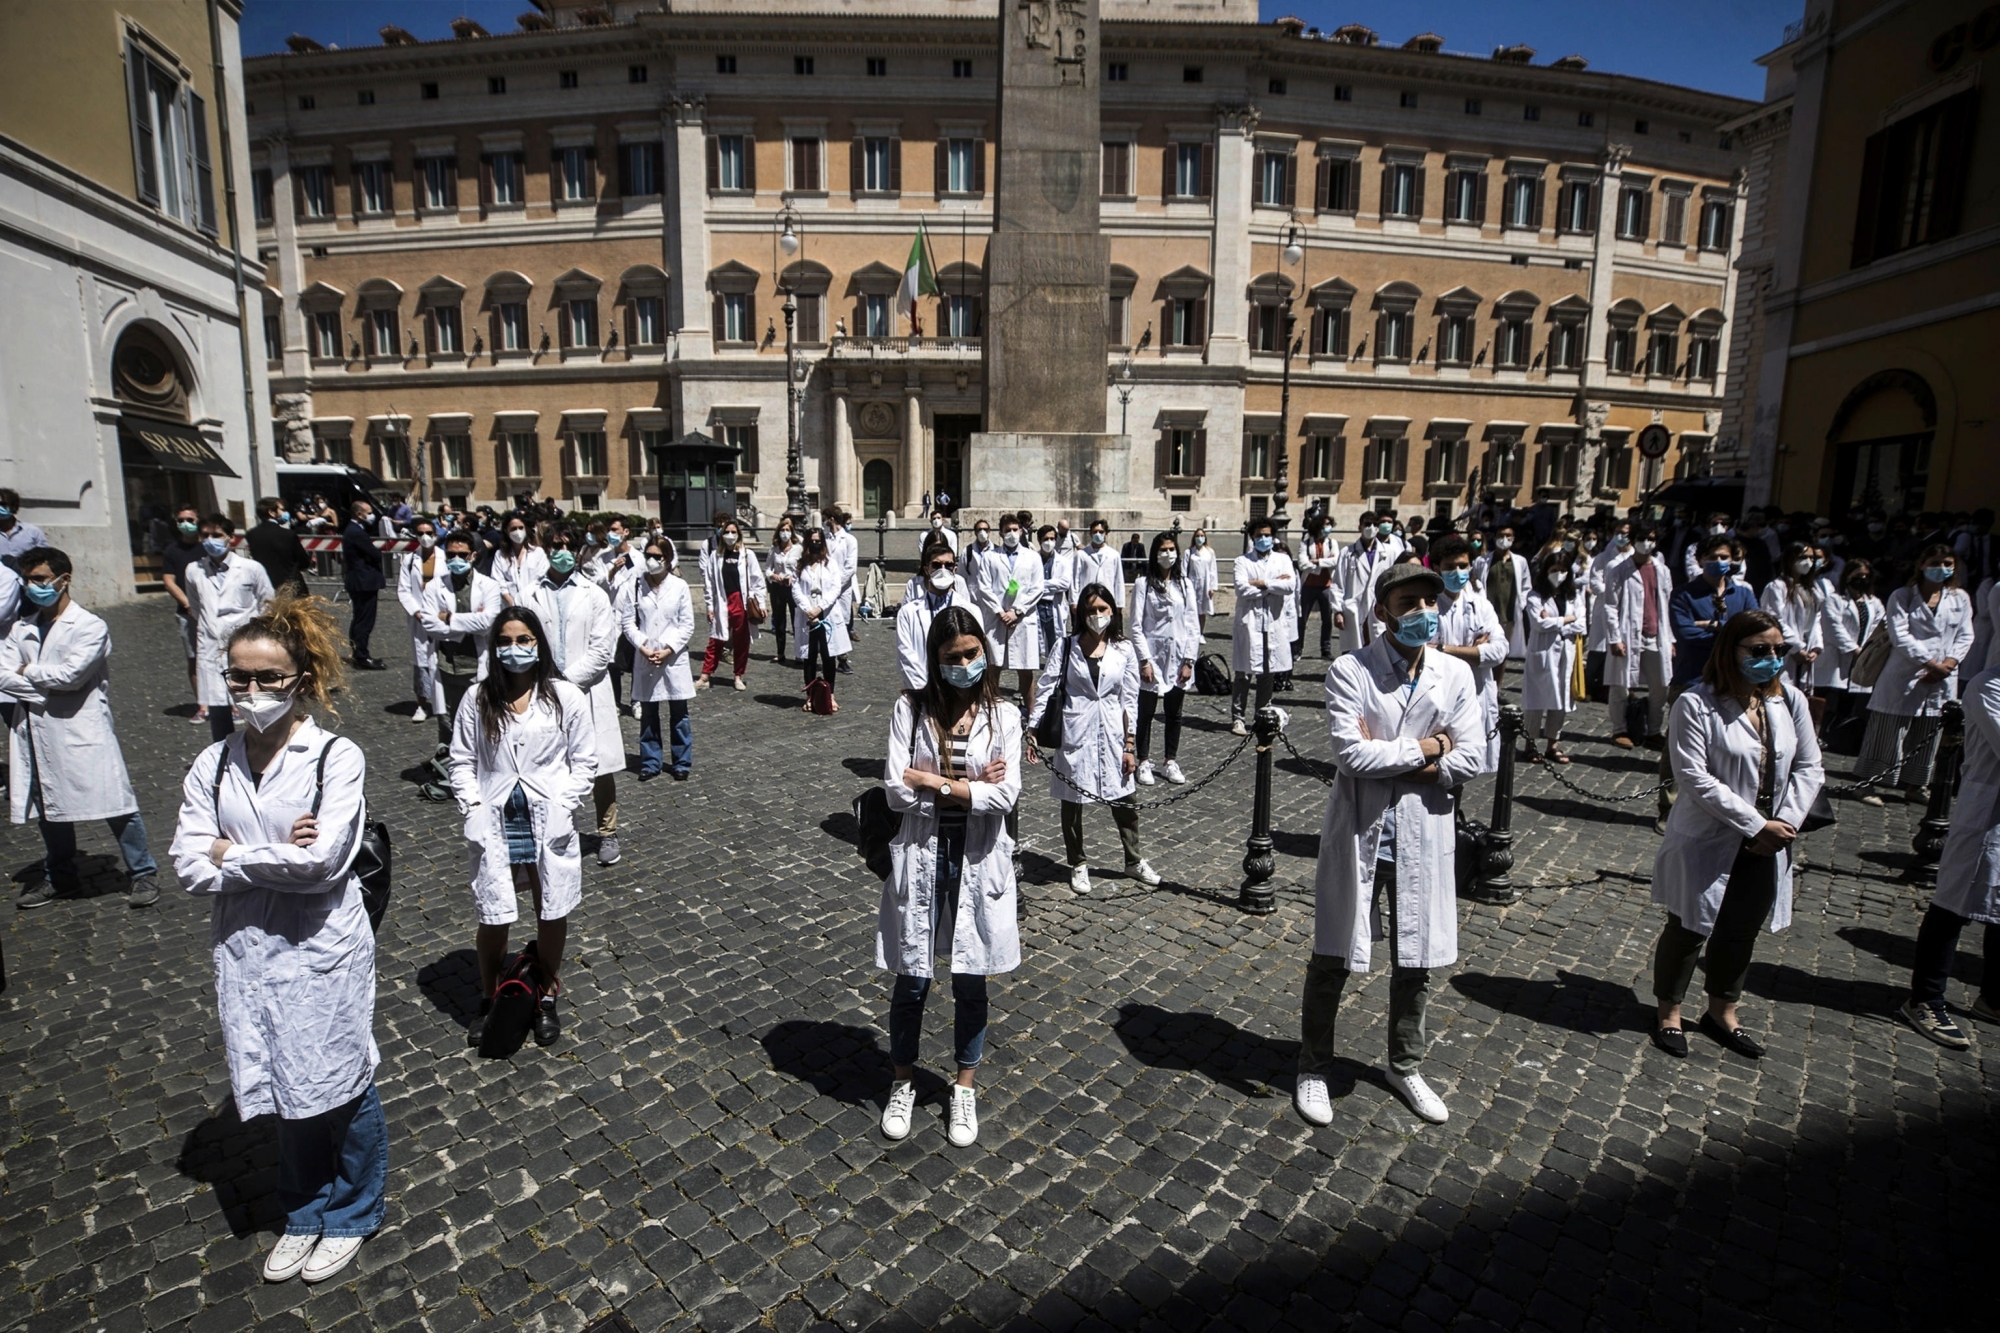 epa08446923 Medical students, graduate students and young doctors protest in front of the Italian Parliament during the second phase of the coronavirus disease (COVID-19) pandemic, emergency in Rome, Italy, 27 May 2020. According to media reports, demonstrators denounced the fragility of the national health system.  EPA/ANGELO CARCONI
ArcInfo